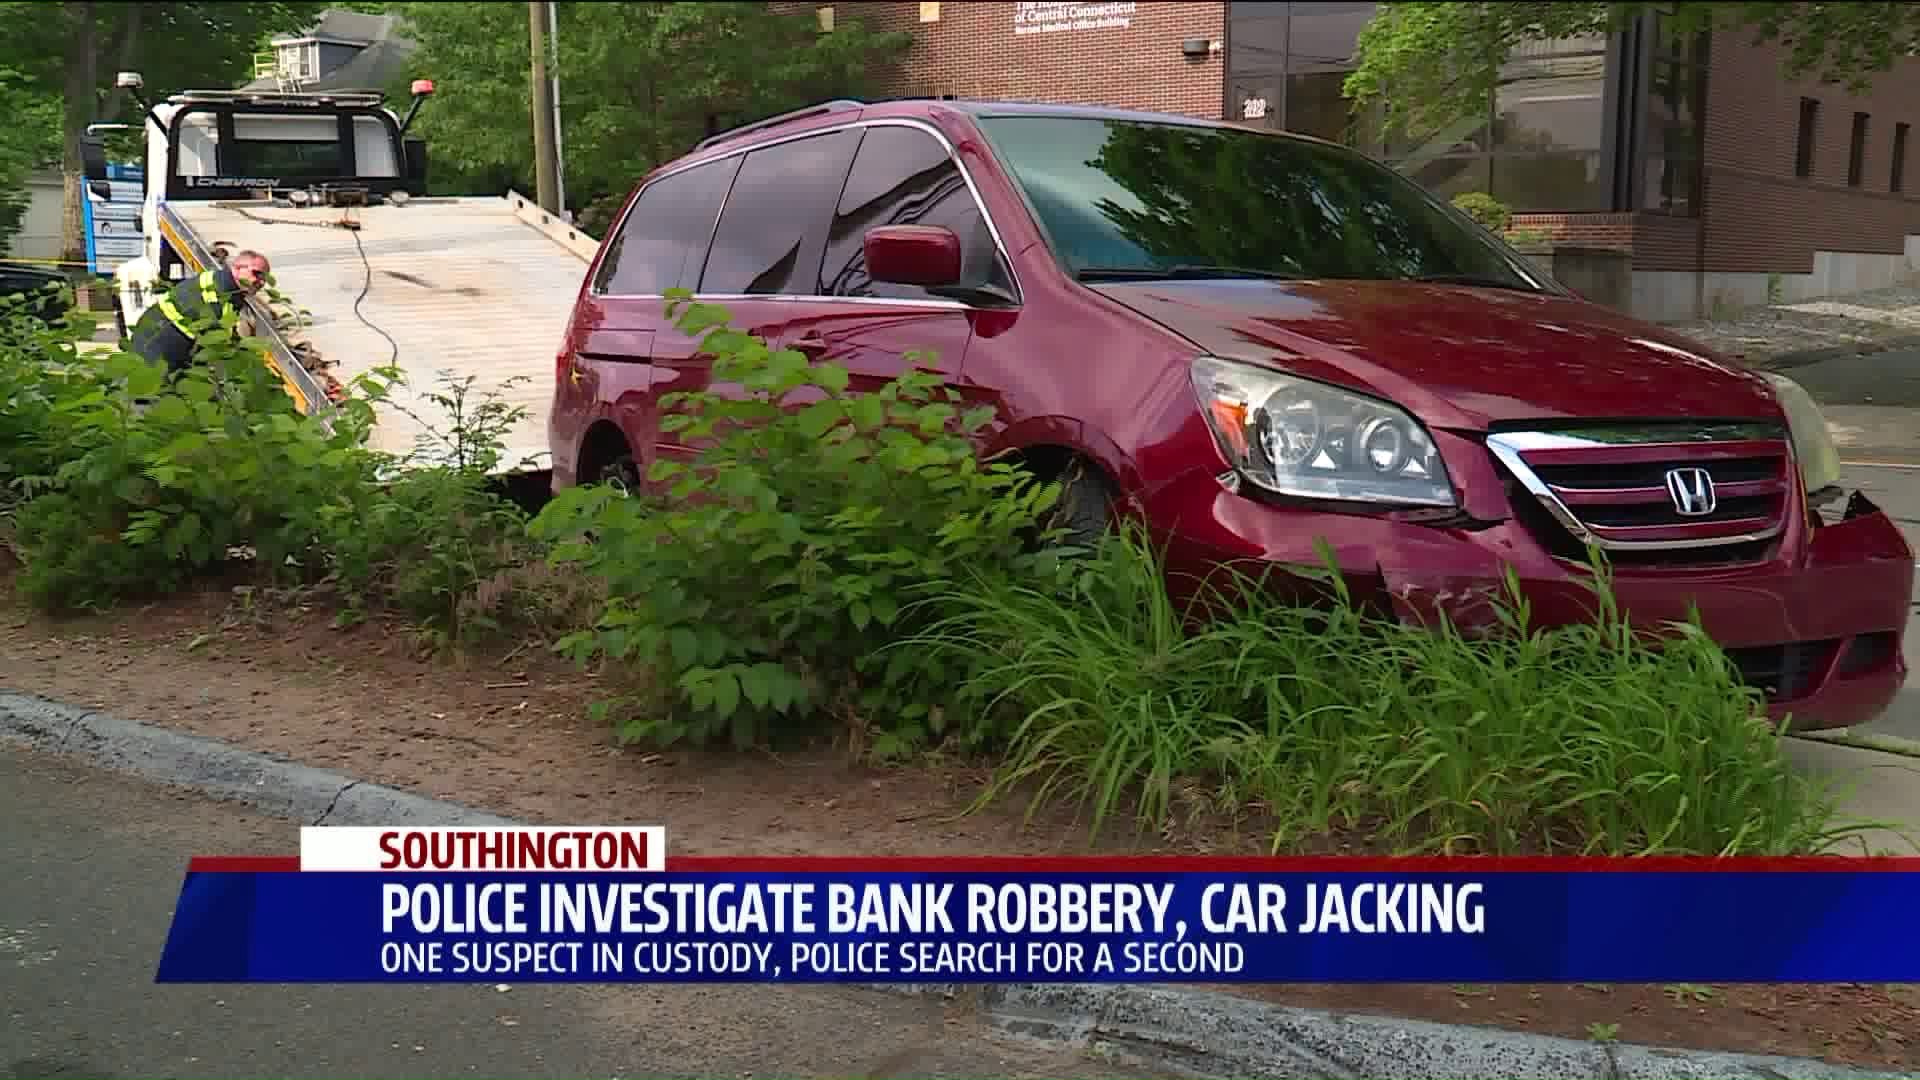 Bank robbery, car jacking in Southington